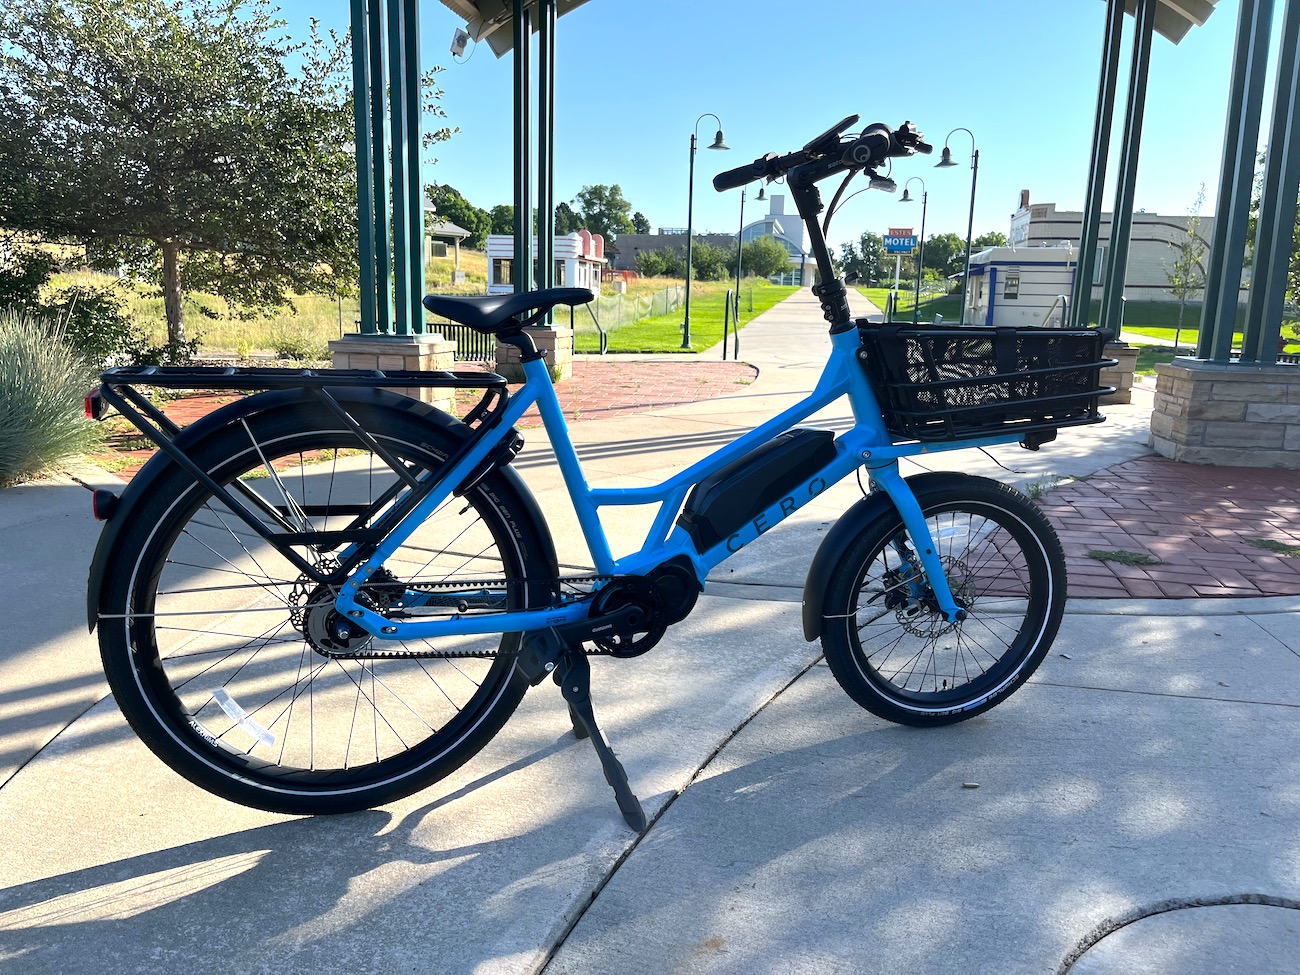 An overall view of the Cero One cargo e-bike.